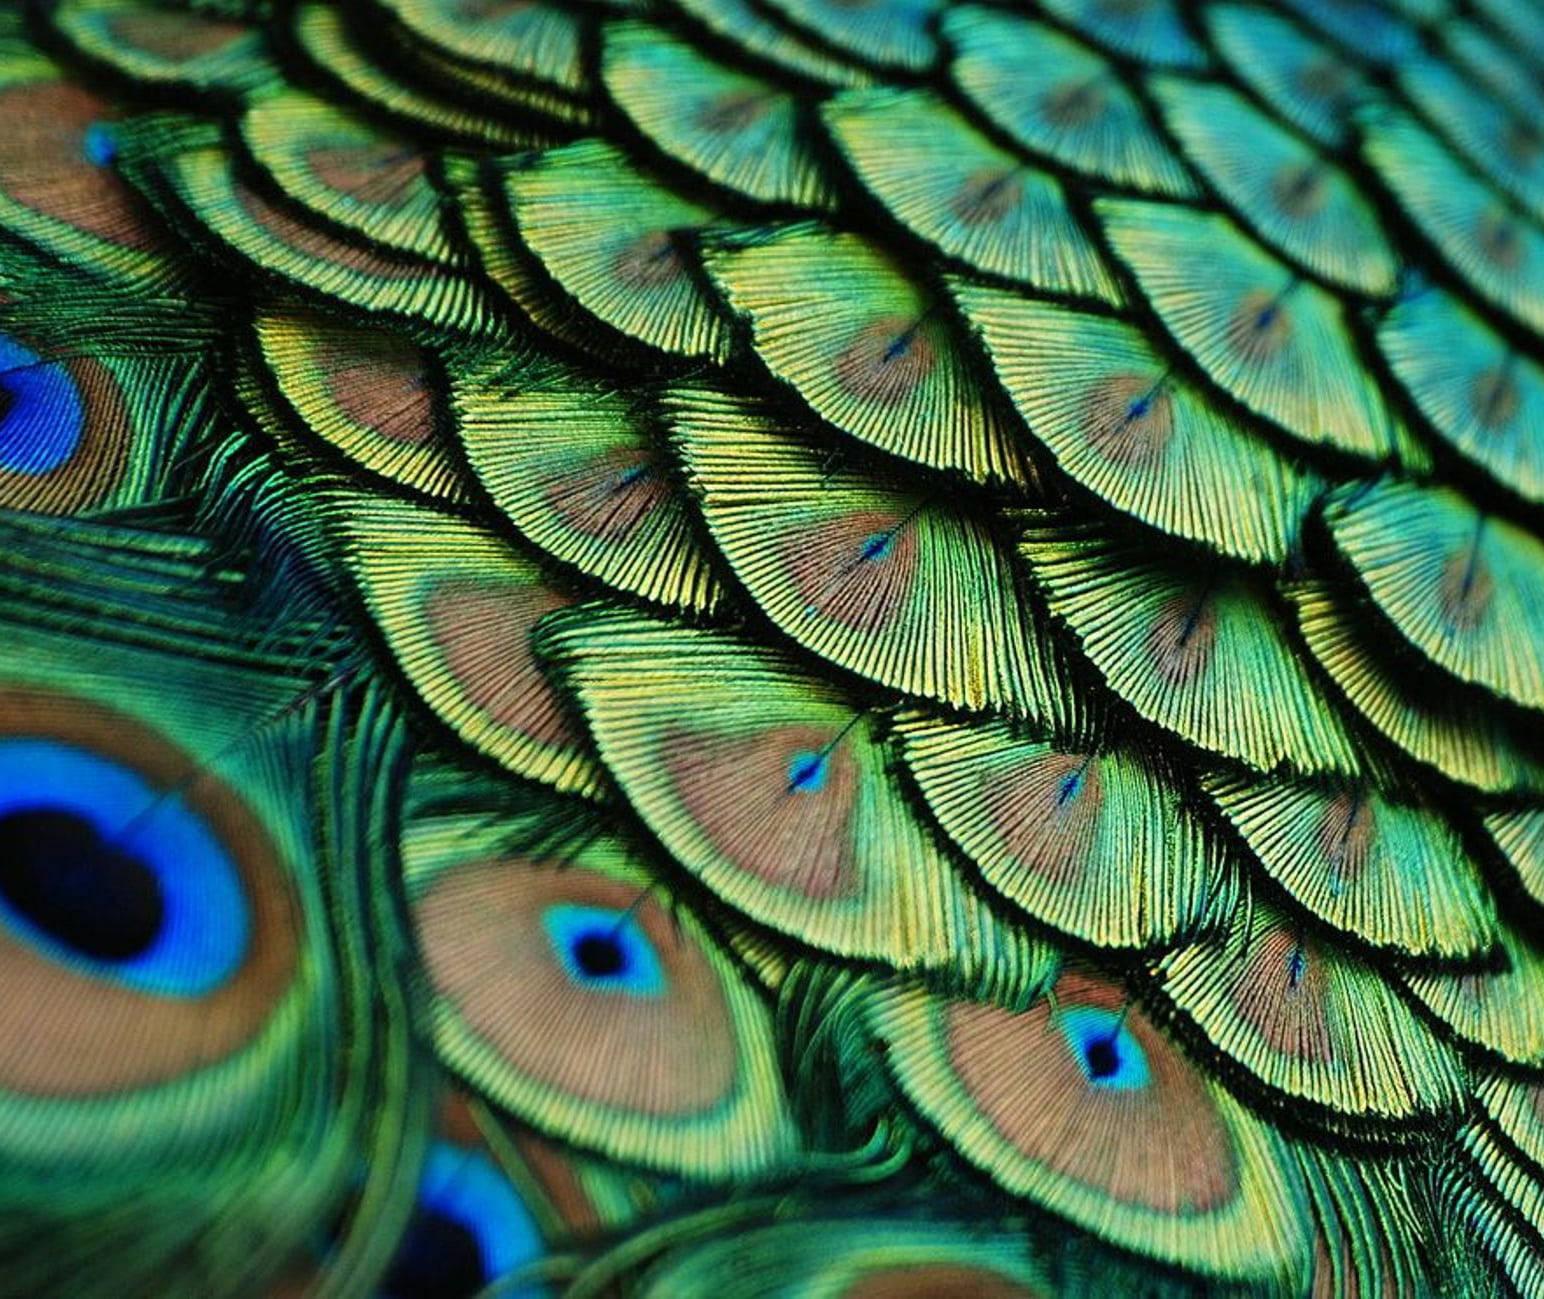 Mor Pankh Peacock Feathers Background